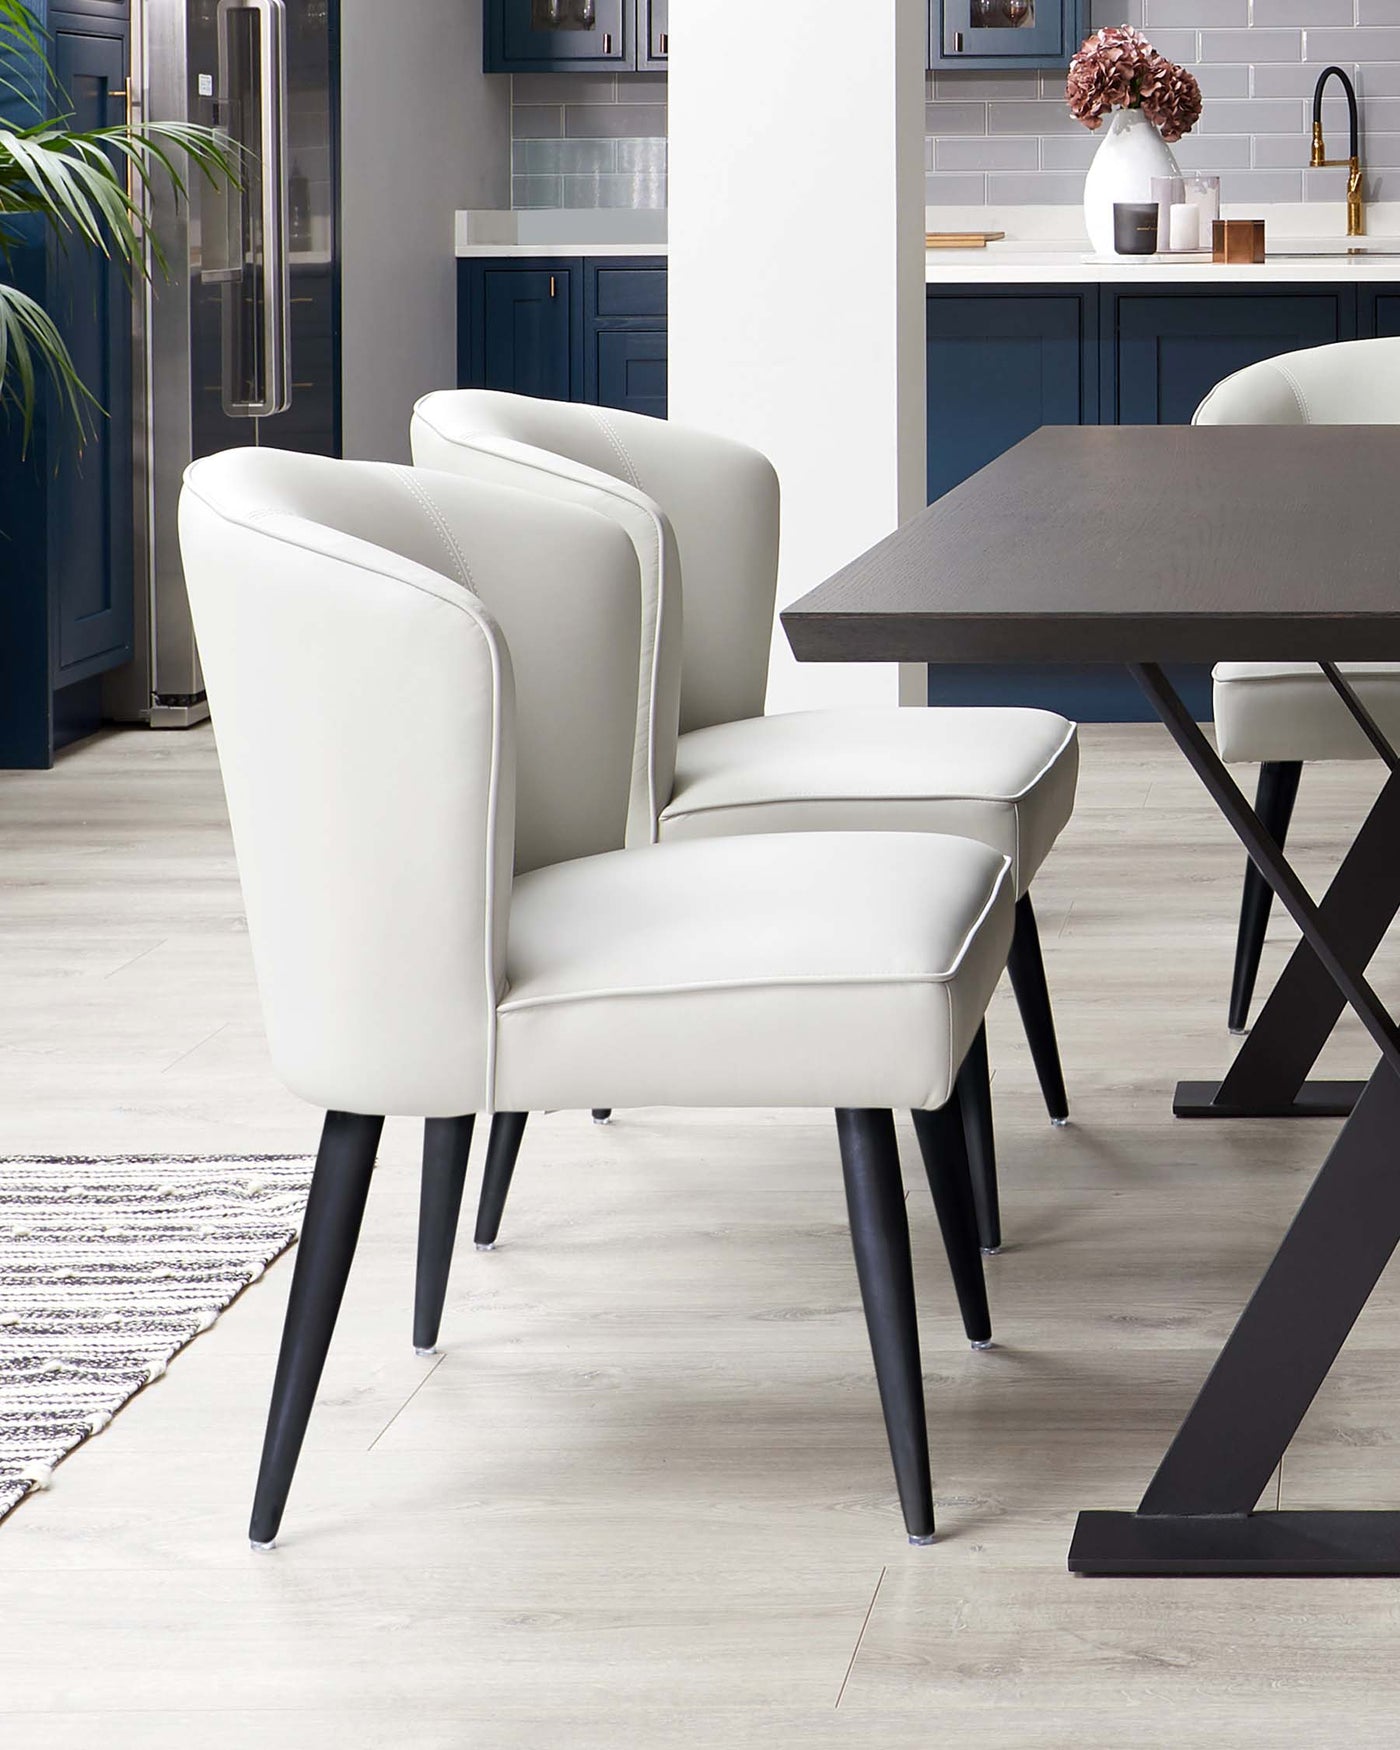 Modern dining room with a dark wooden rectangular table and a set of three sleek, off-white upholstered chairs with dark legs. The chairs have a curved backrest and plush seating. The setting is complemented by a contemporary kitchen in the background.